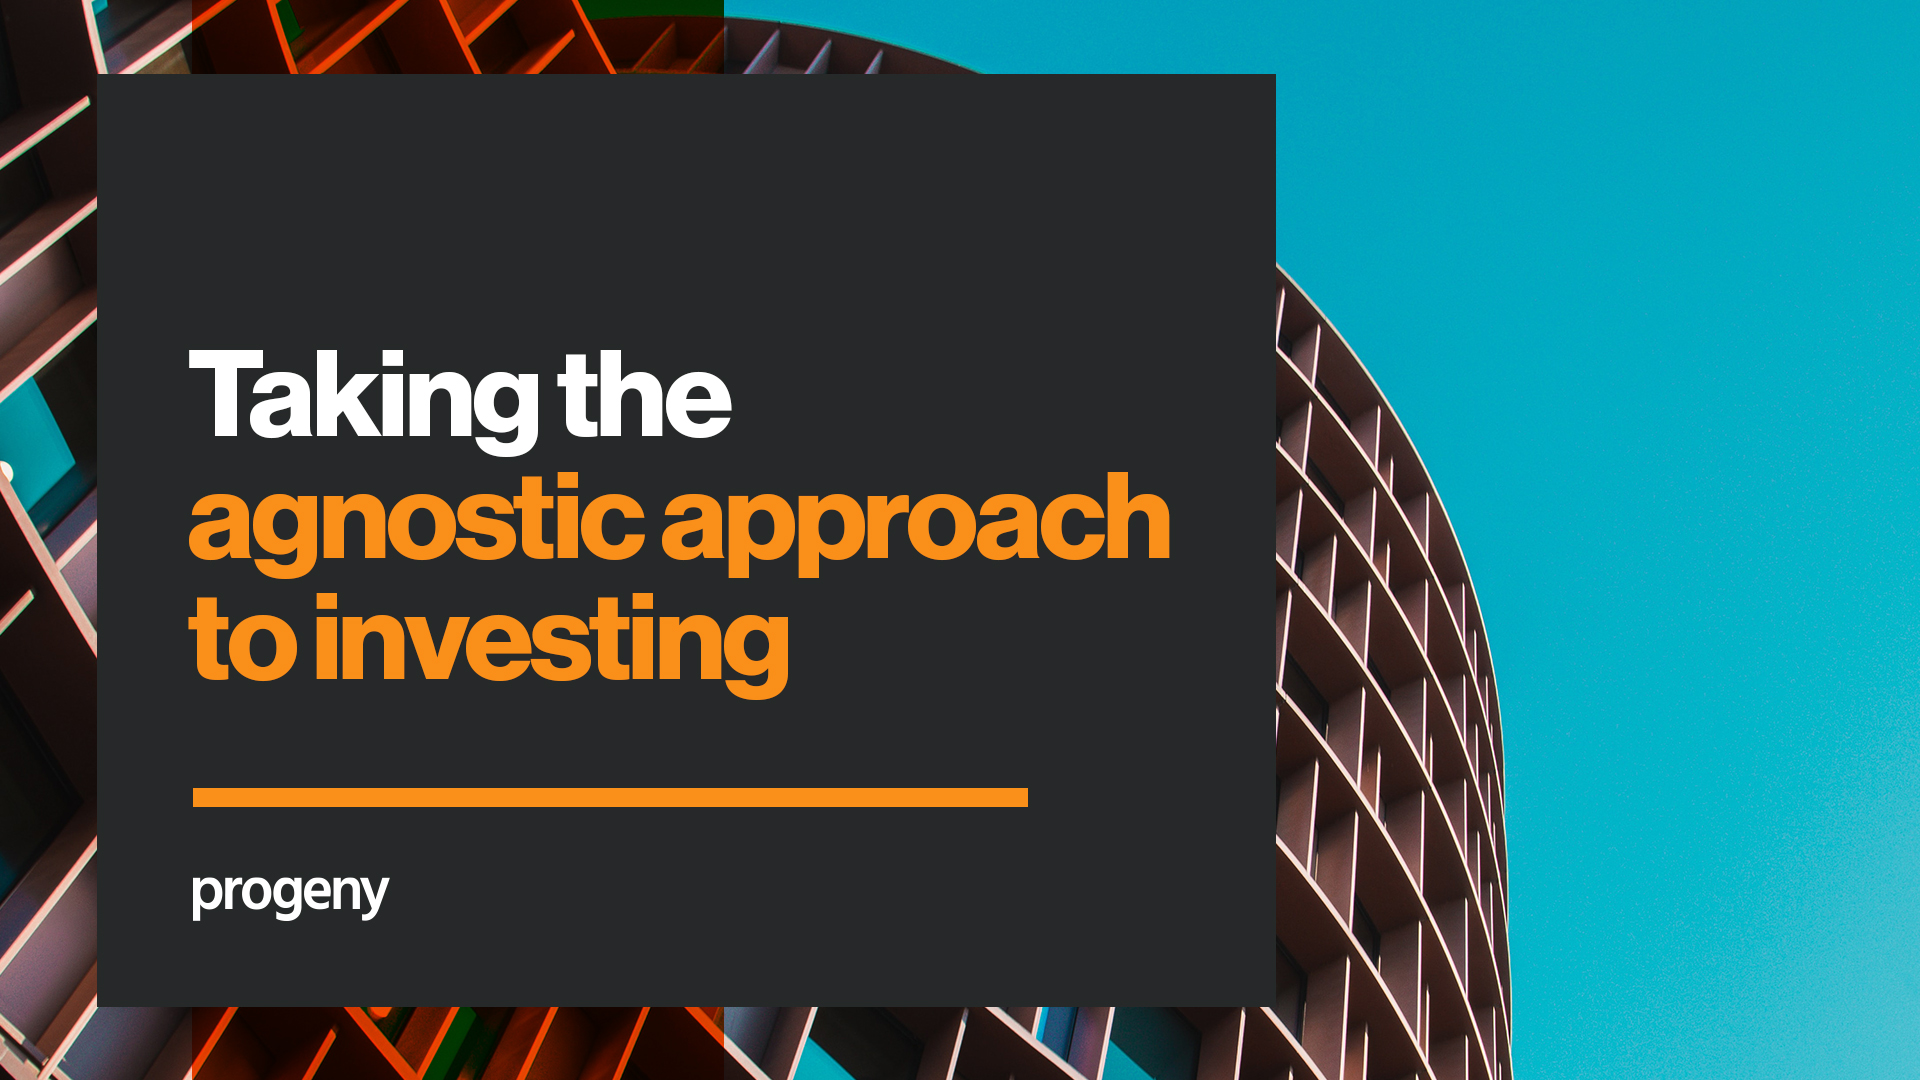 Agnostic approach to investing